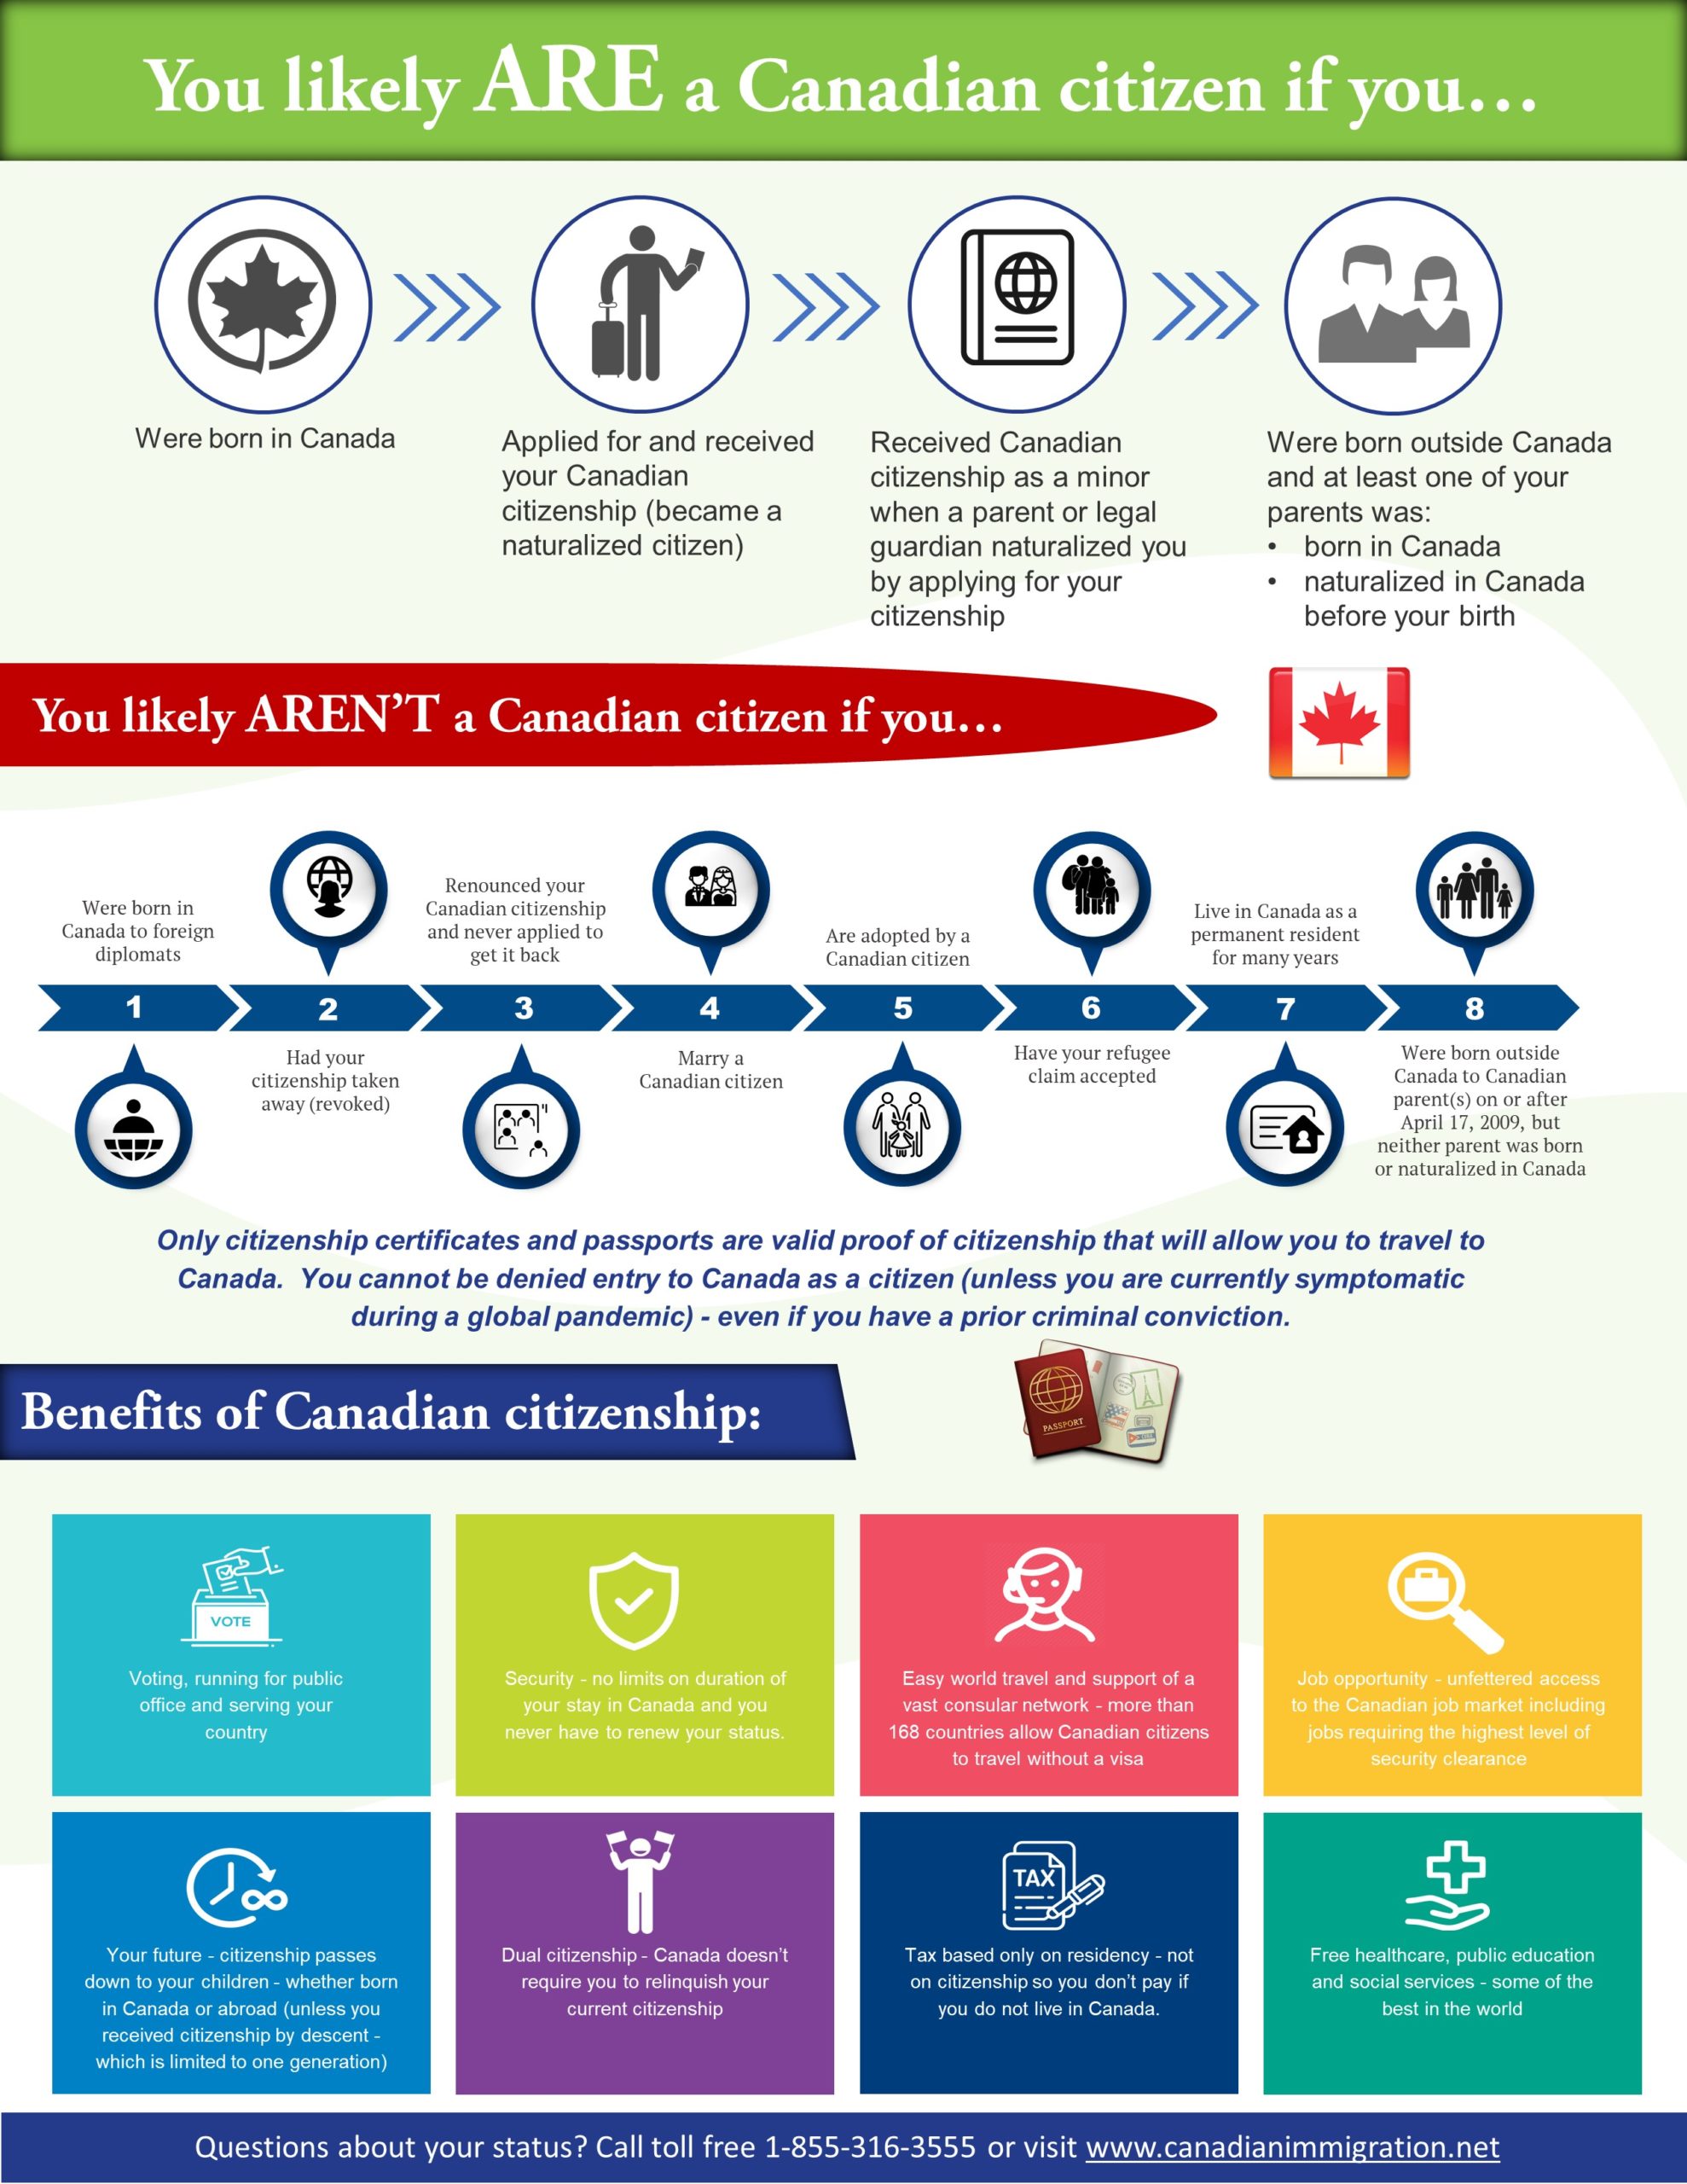 Canadian Citizenship as a way to overcome inadmissibility to Canada - DUI  Canada Entry